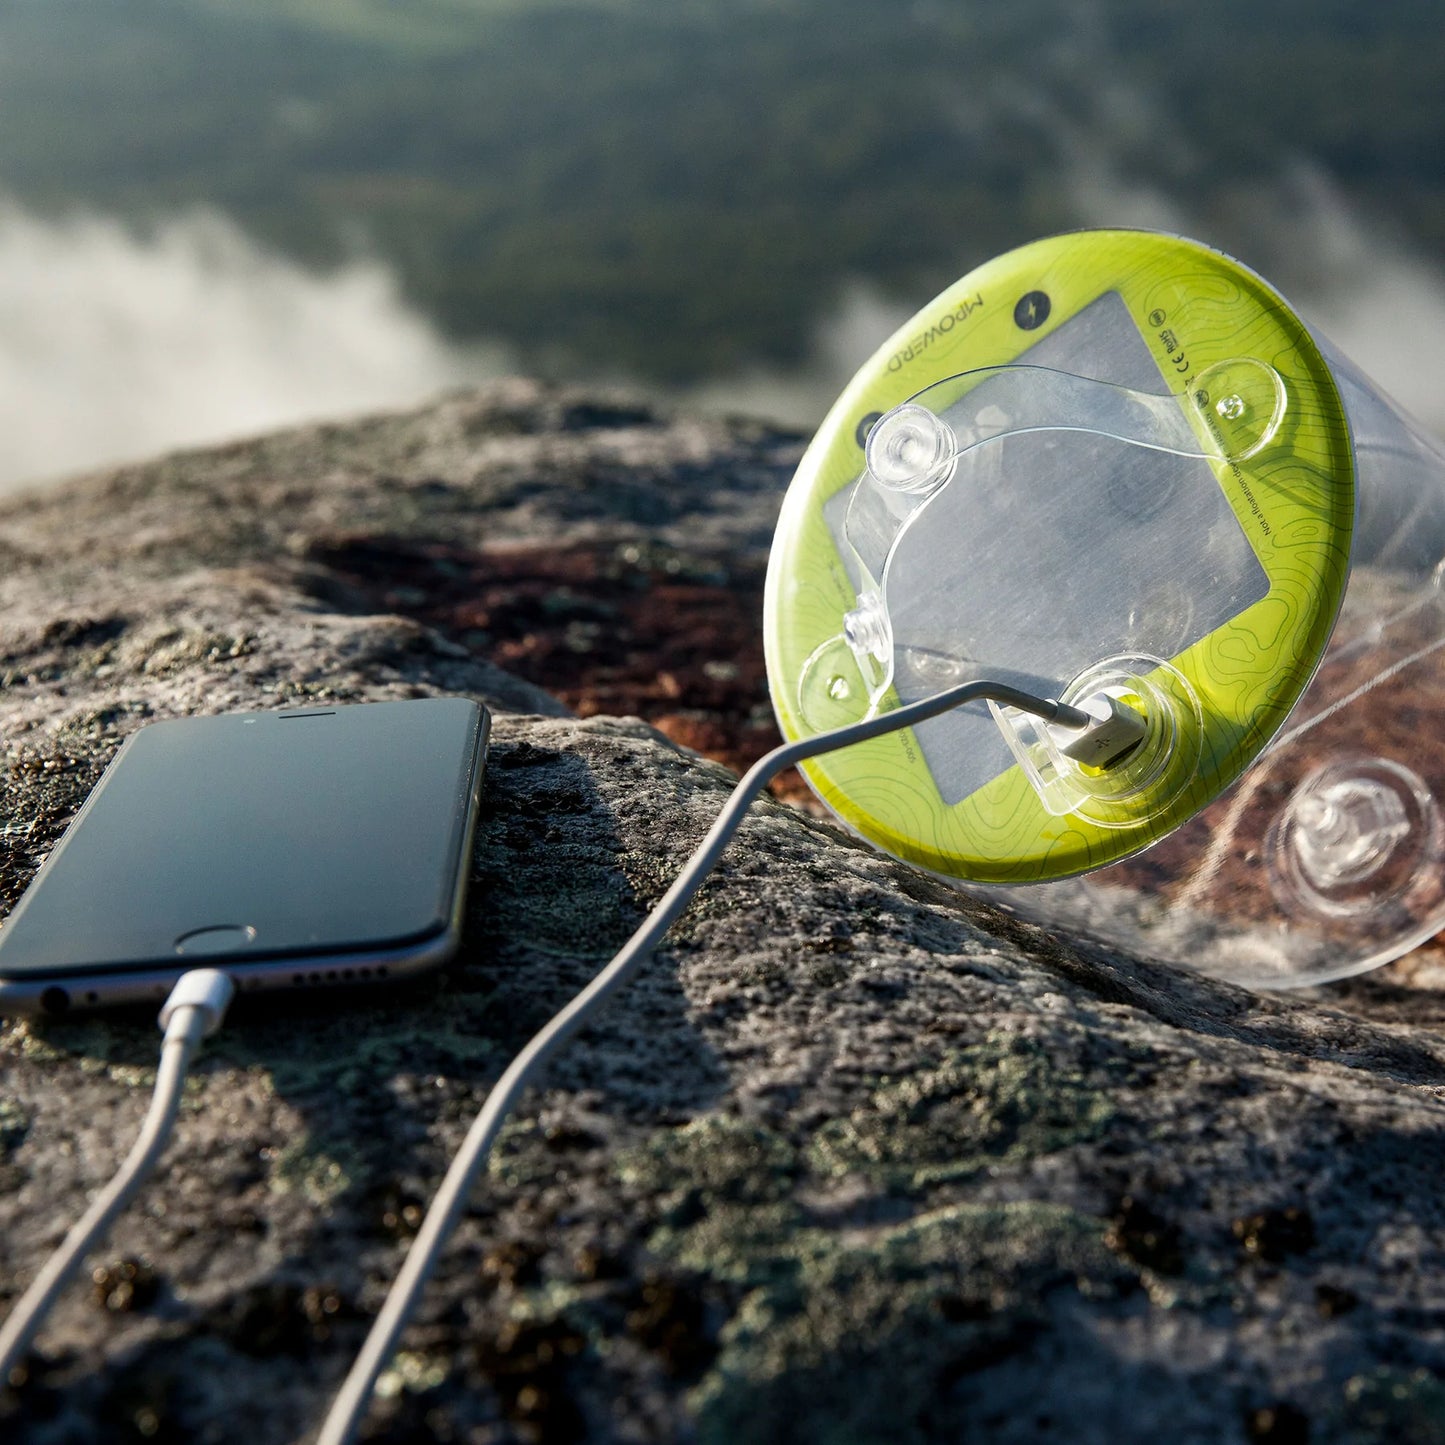 MPOWERED Luci® Pro inflatable solar light & mobile charger